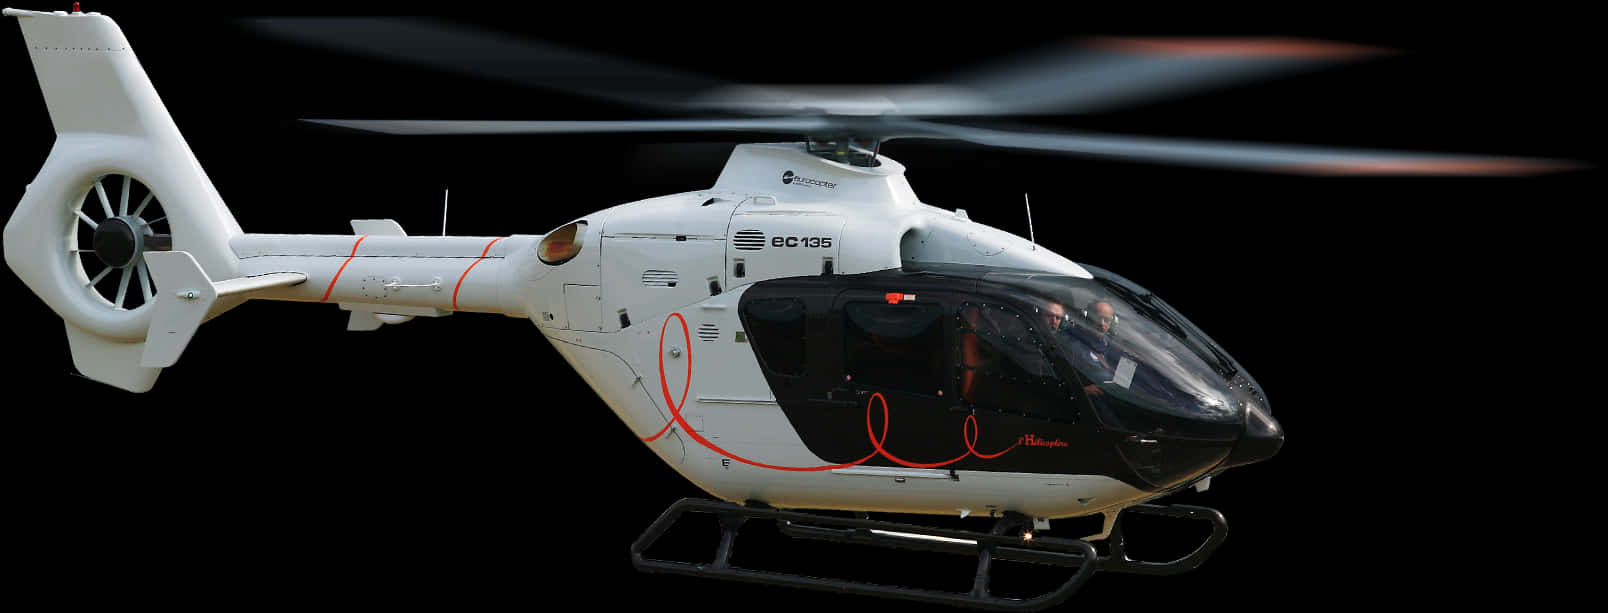 Eurocopter_ E C135_ In_ Flight PNG